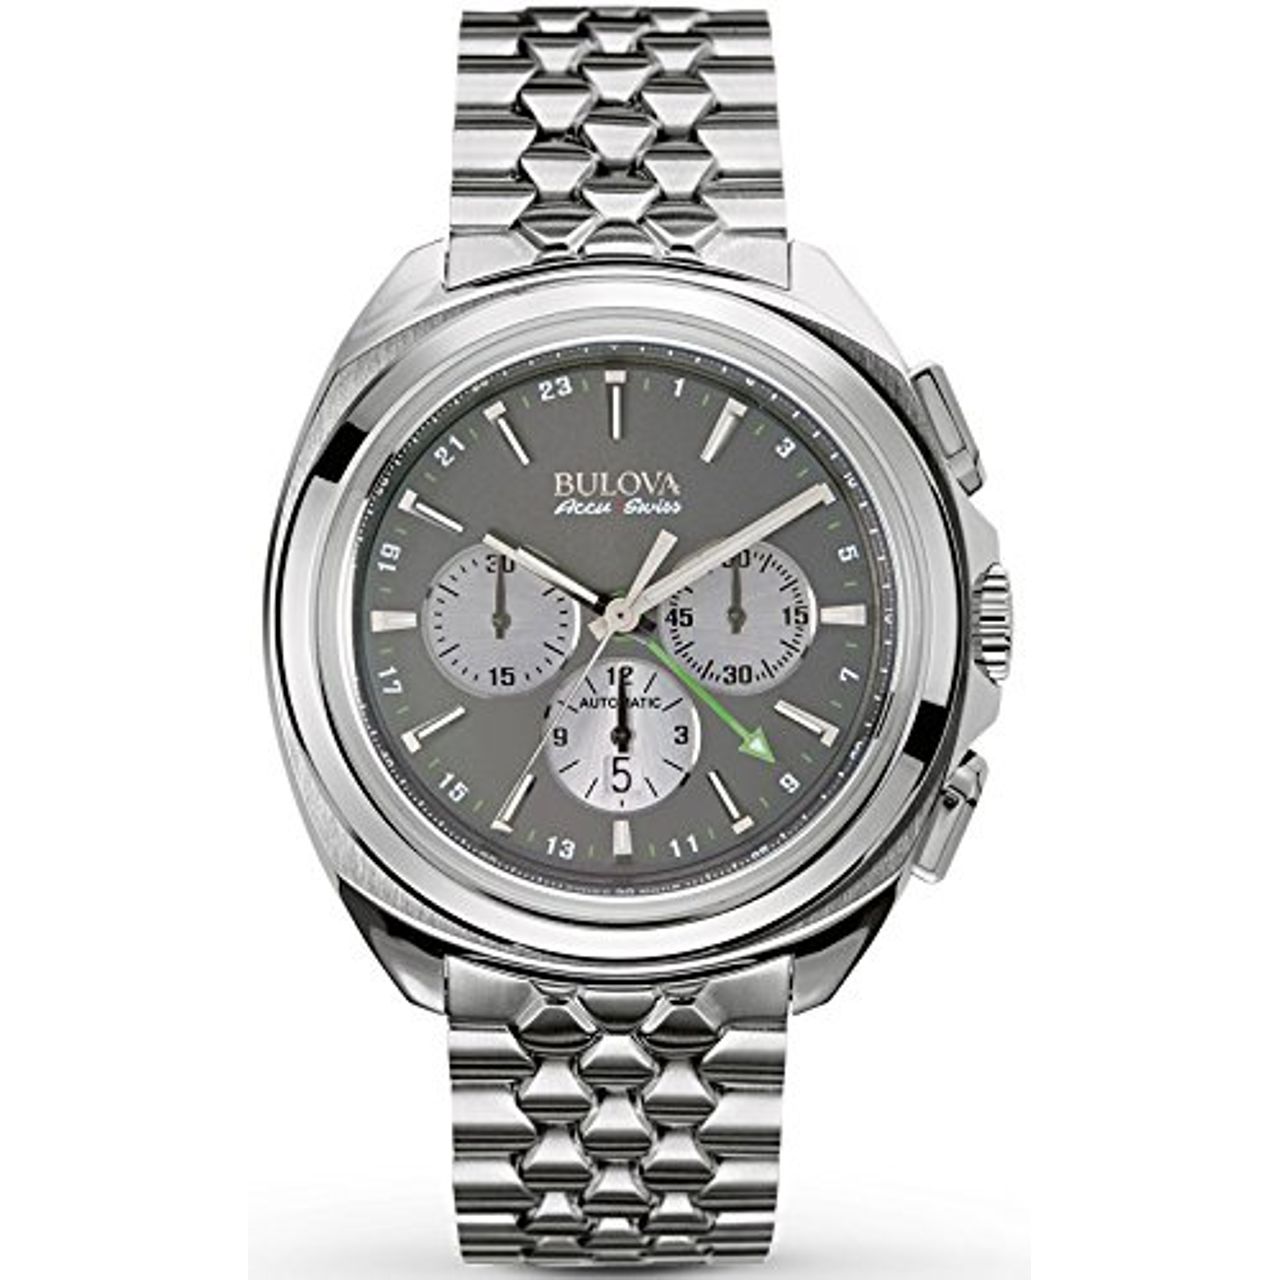 Accuswiss 63B187 Mens Grey Dial Chronograph Automatic Watch